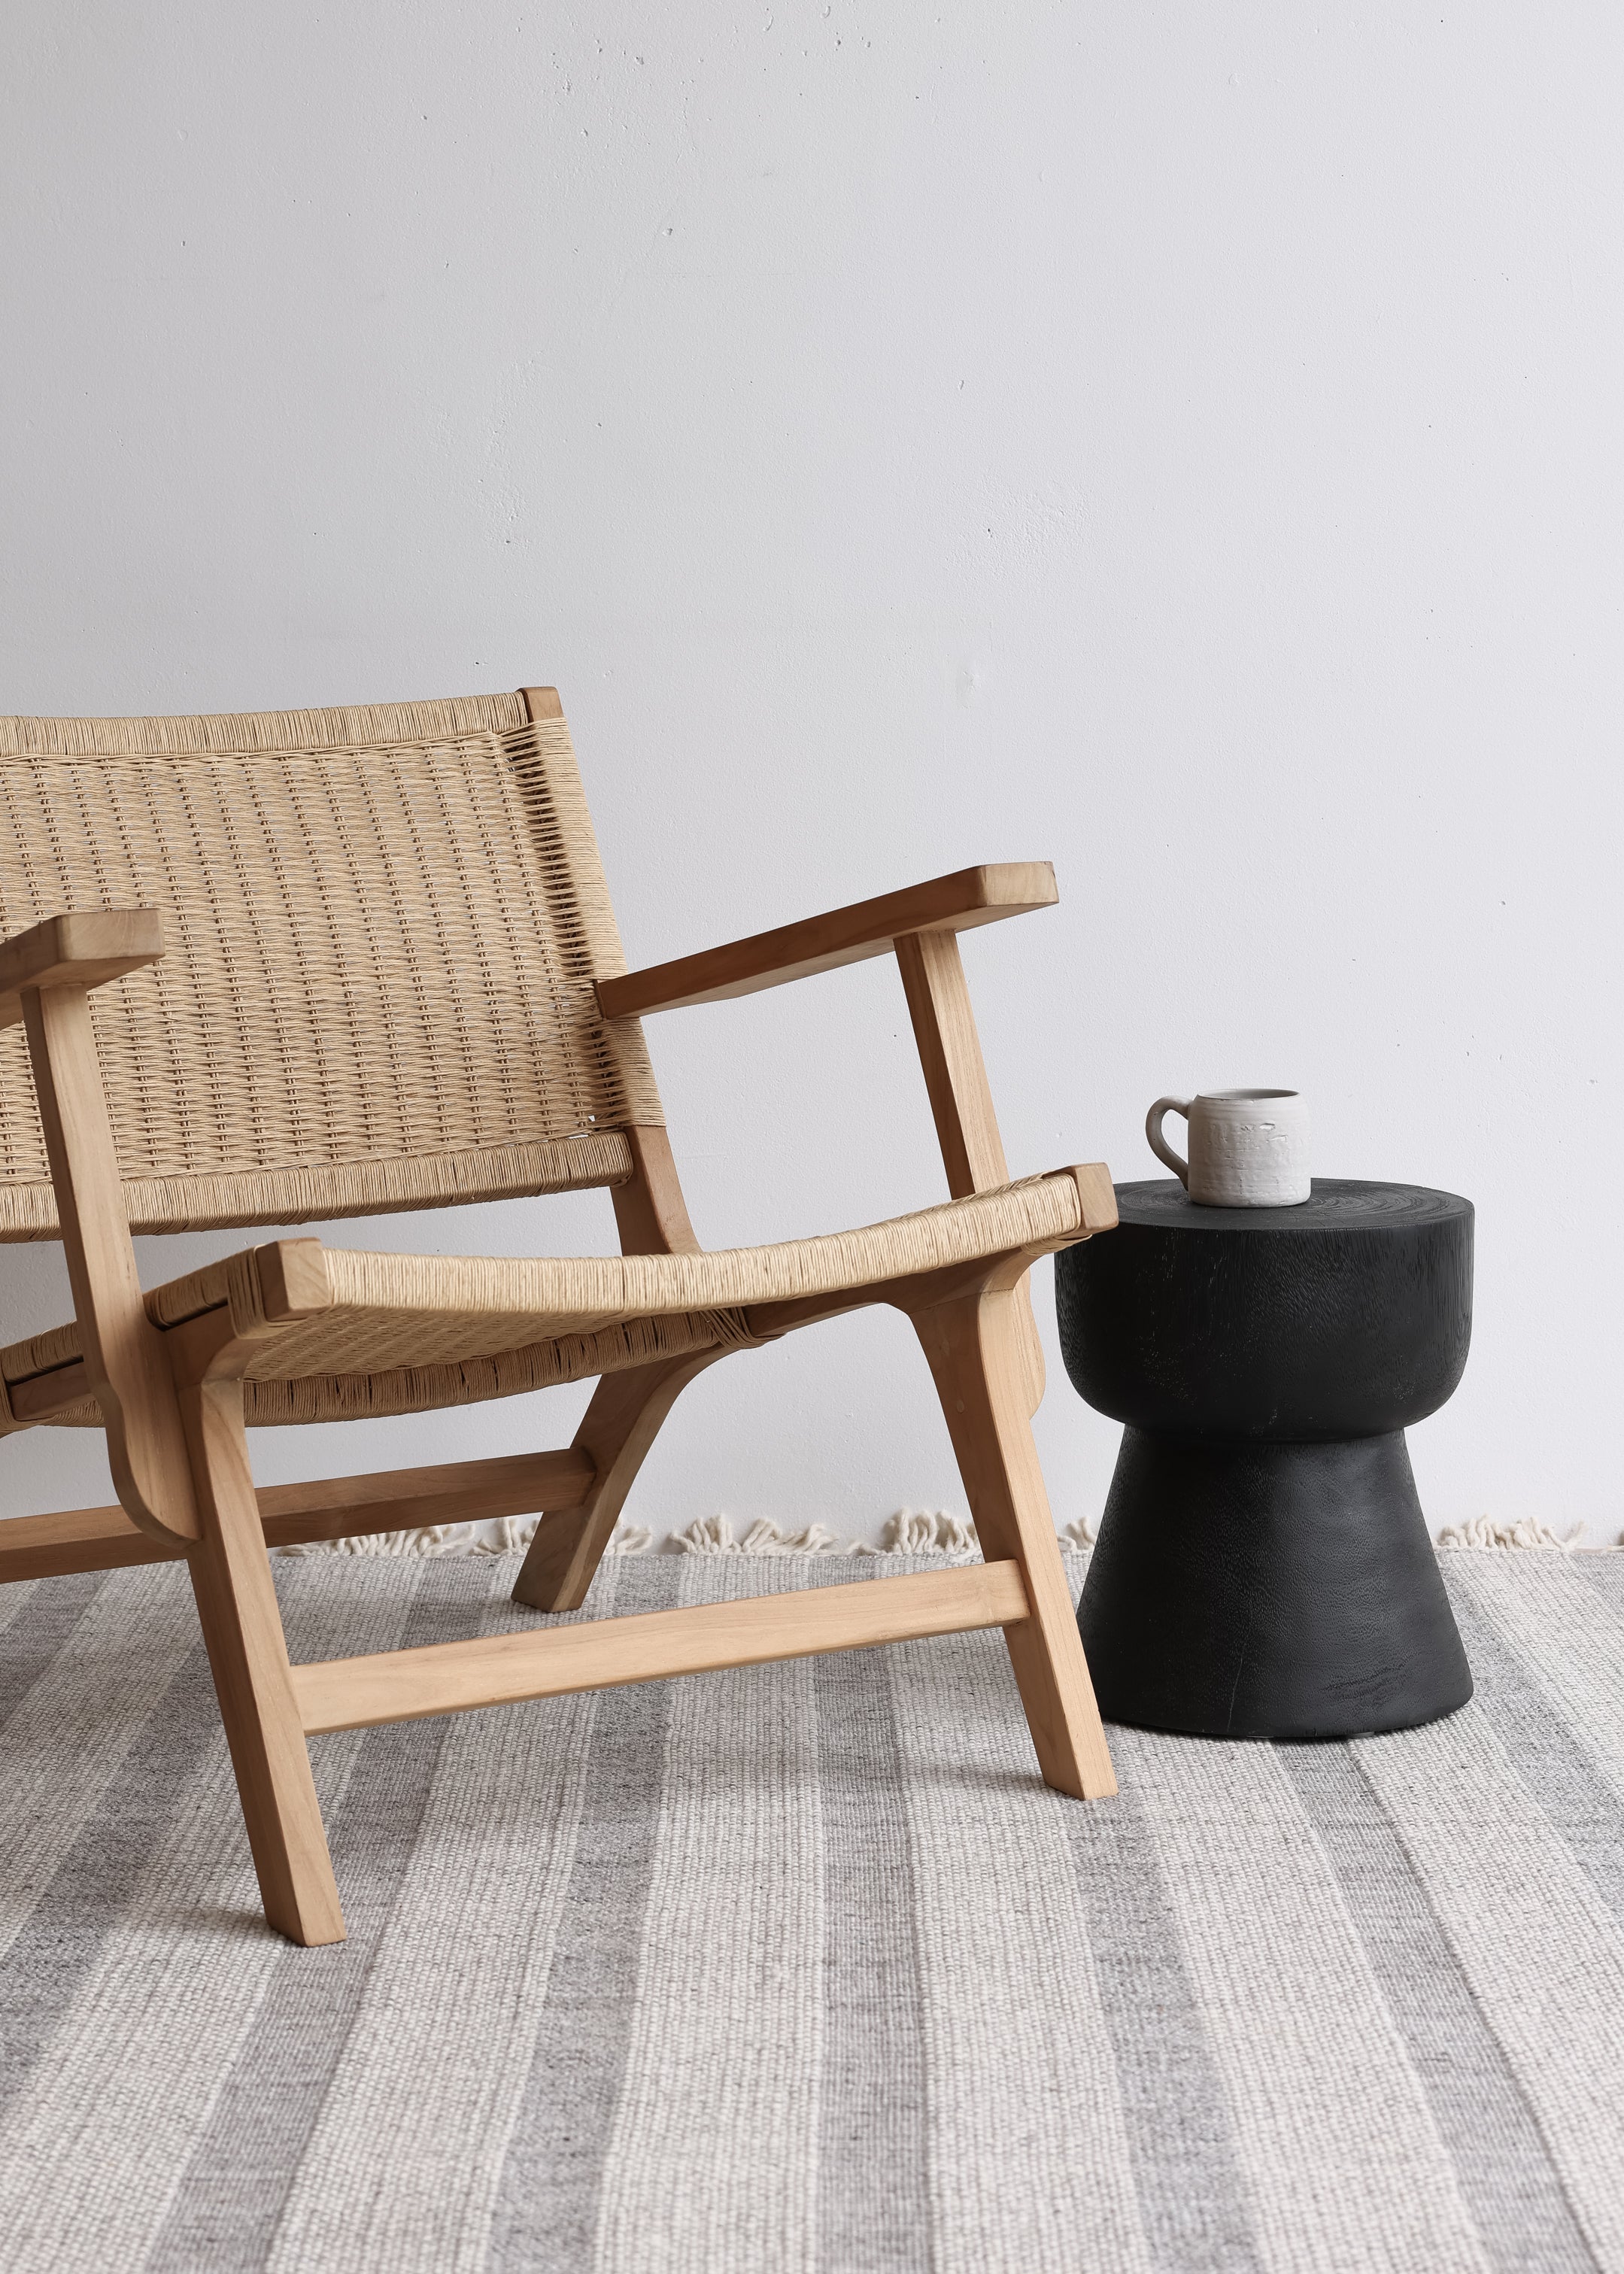 Sunday Teak Lounger with Arm Rest / Natural